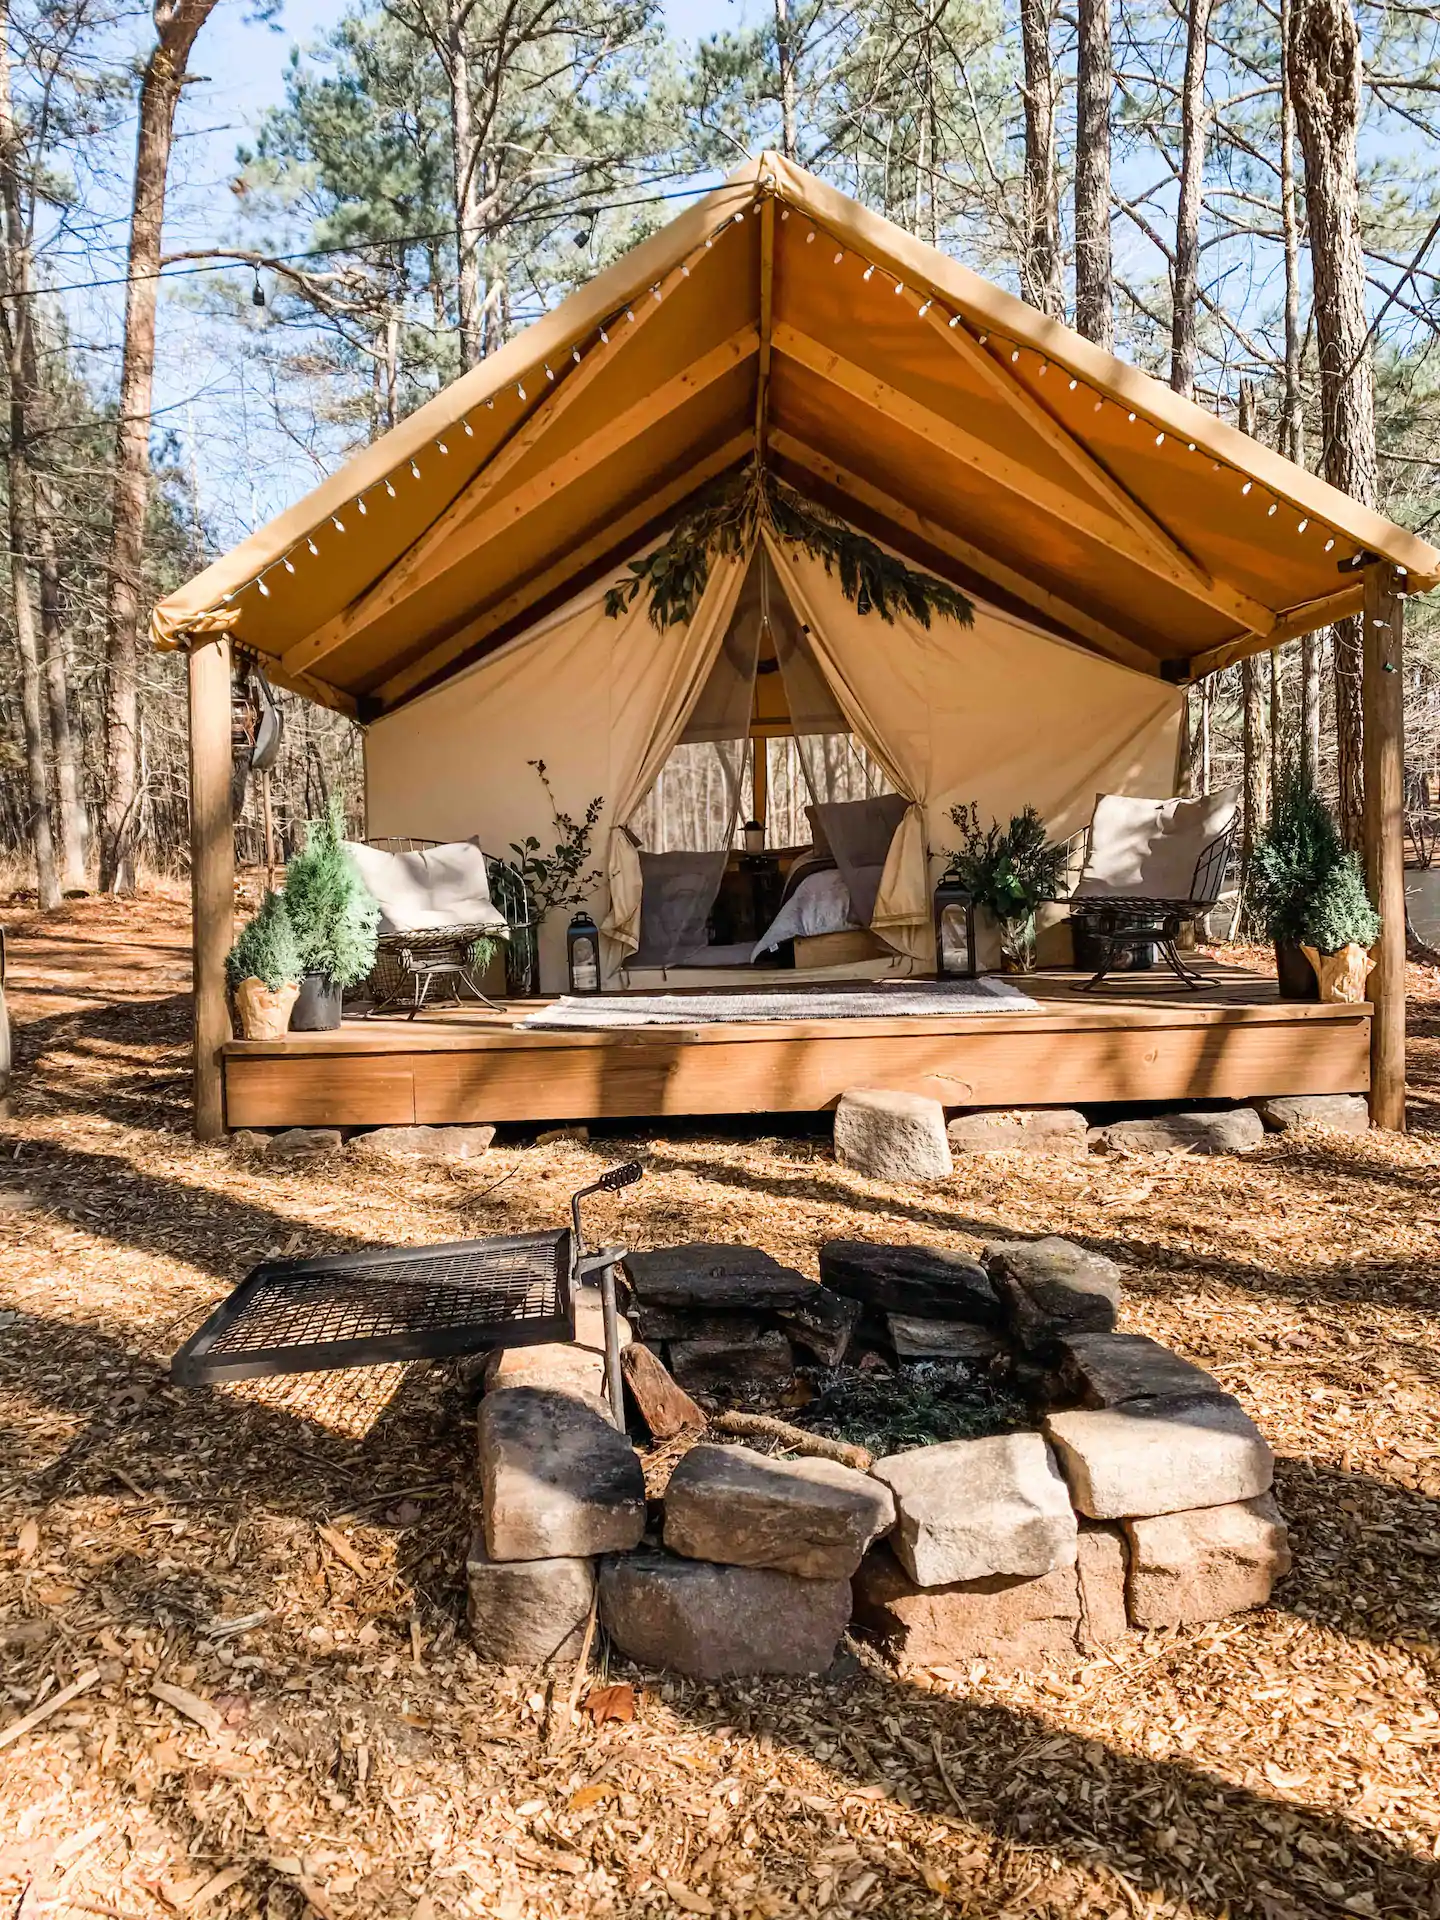 Photo of a luxury tent Airbnb located in Georgia. 